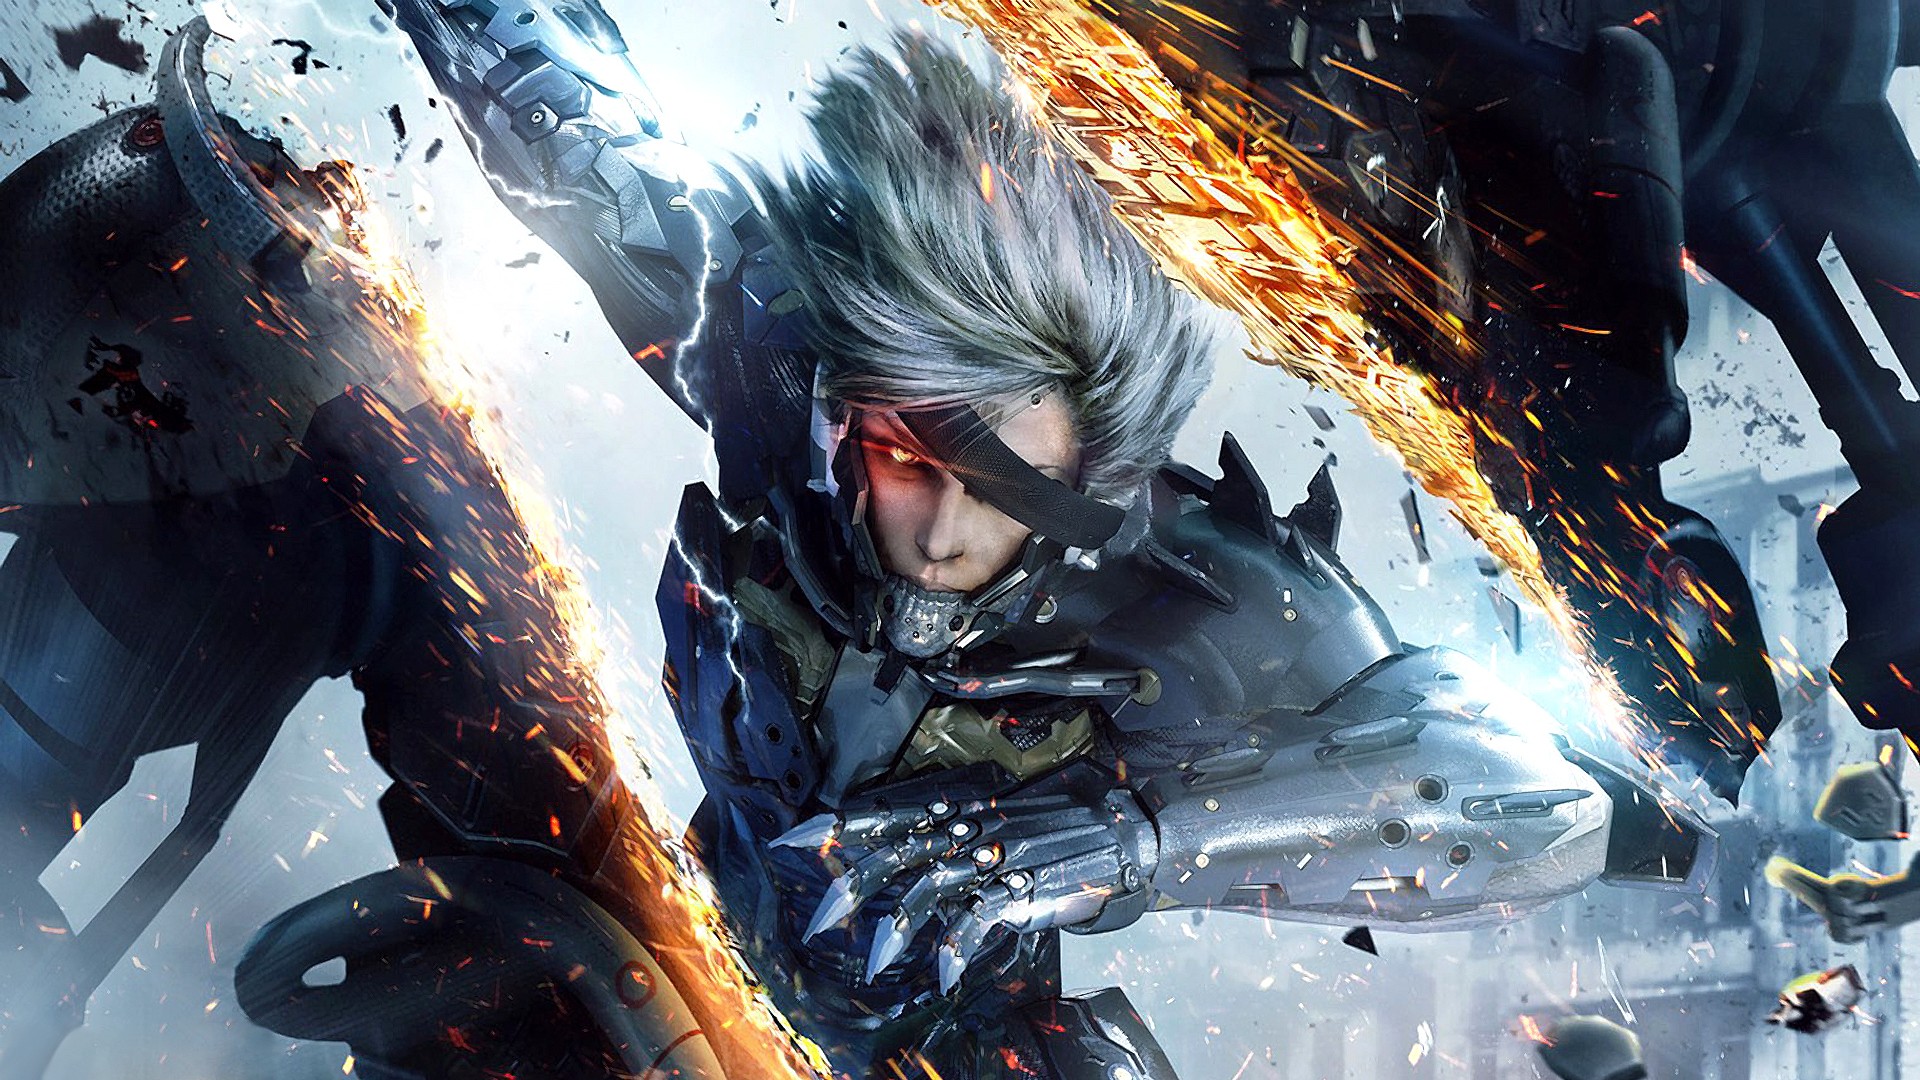 Note All Metal Gear Rising HD Wallpaper Are Presented In